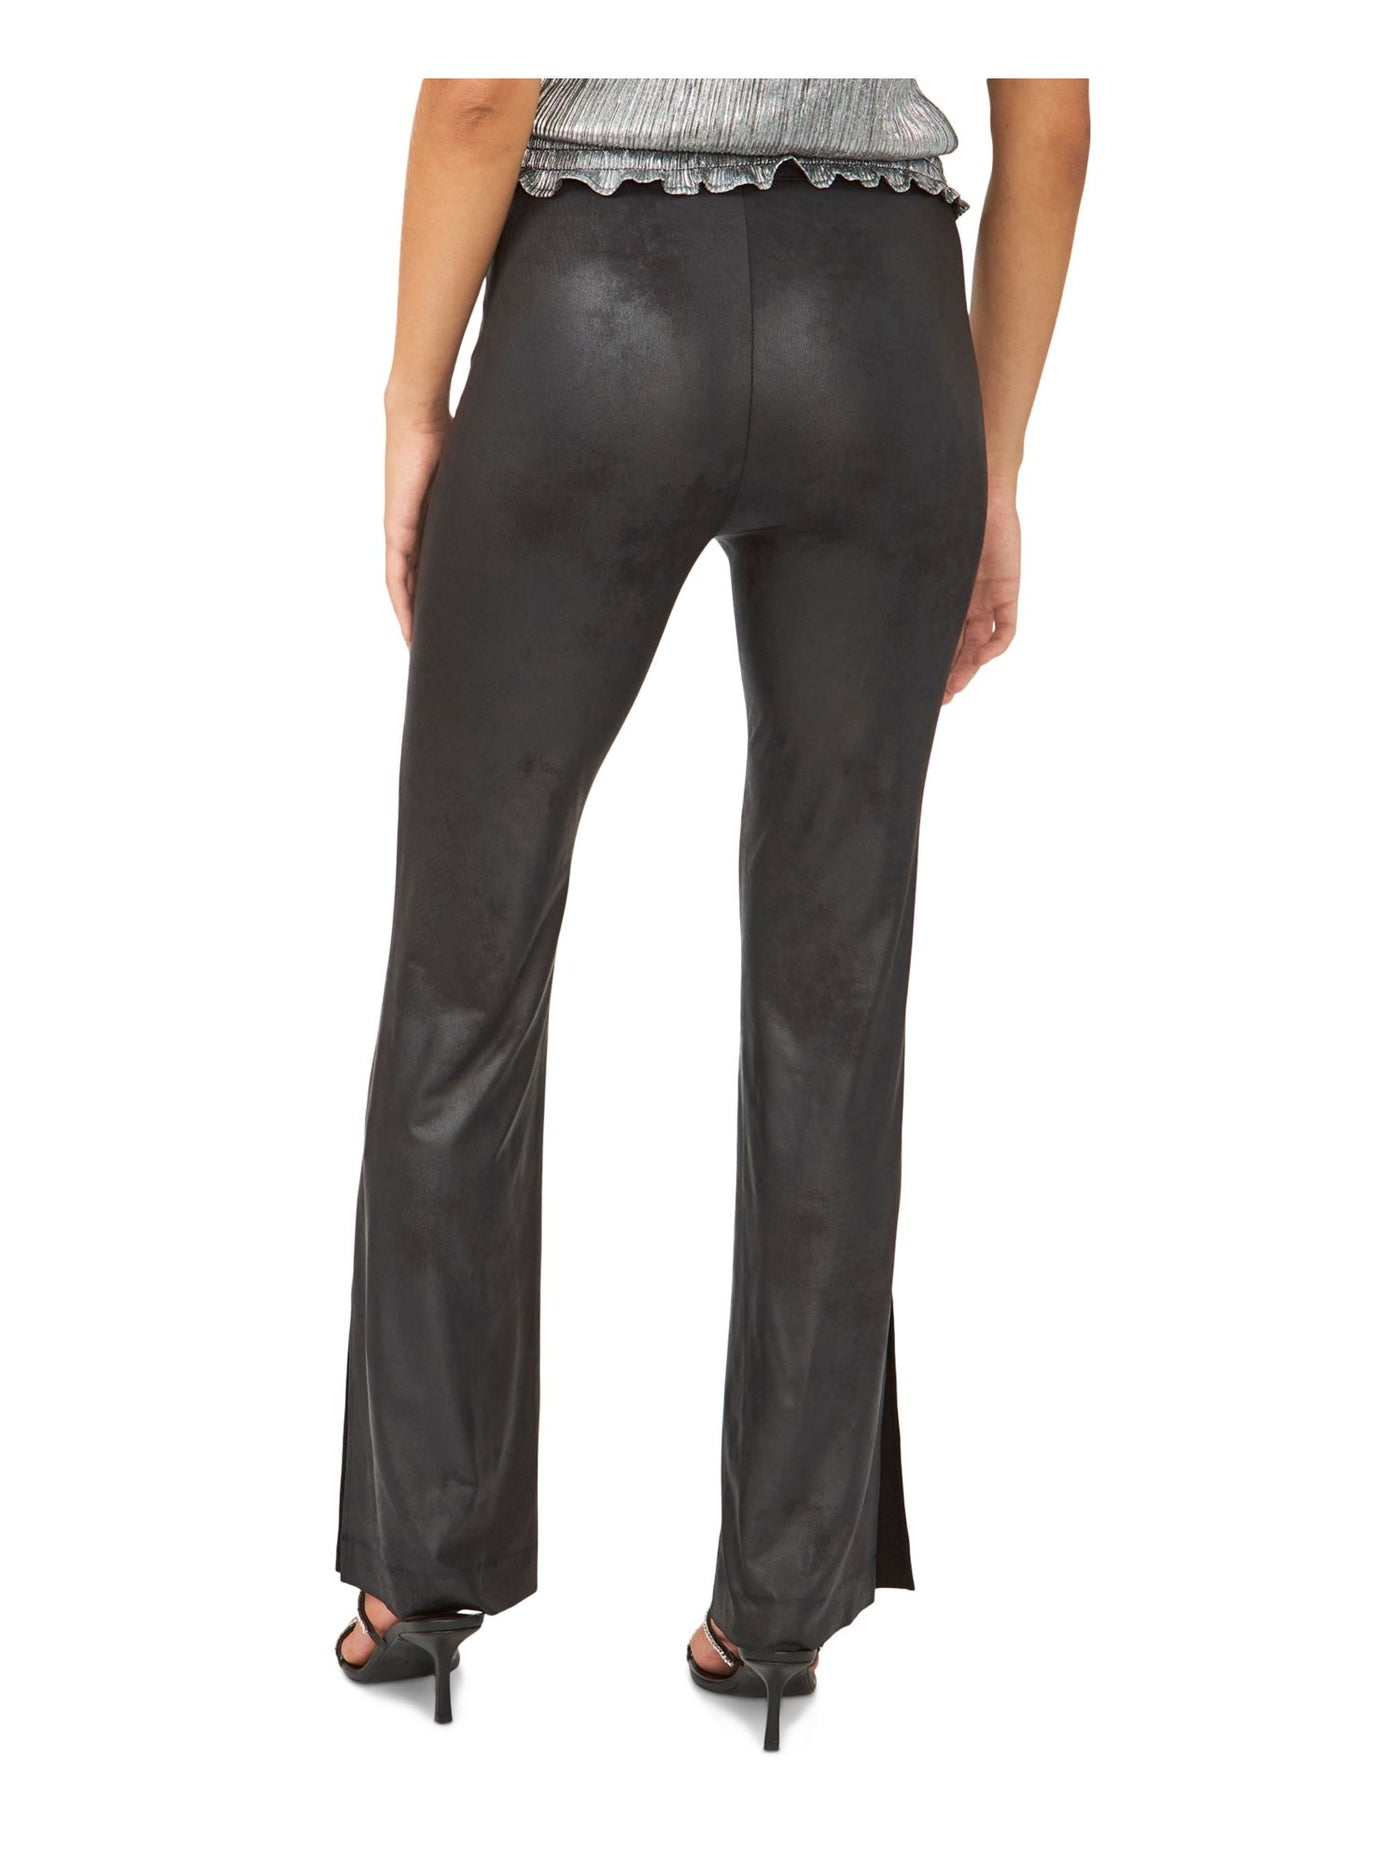 28TH & PARK Womens Slitted Wide Leg Pants